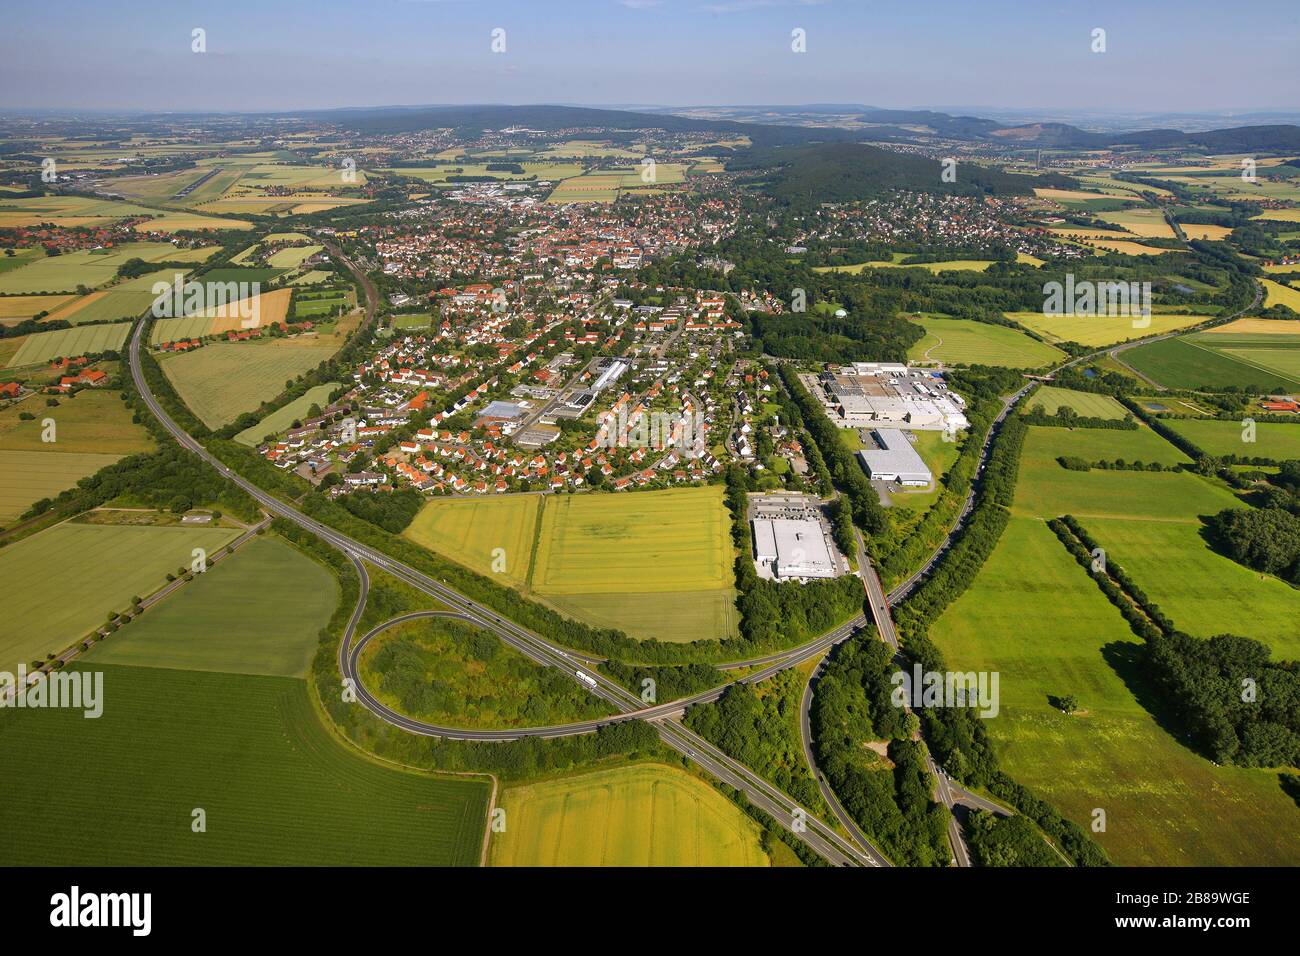 , Bueckeburg with country roads B 65 and 83, 27.06.2011, aerial view, Germany, Lower Saxony, Bueckeburg Stock Photo